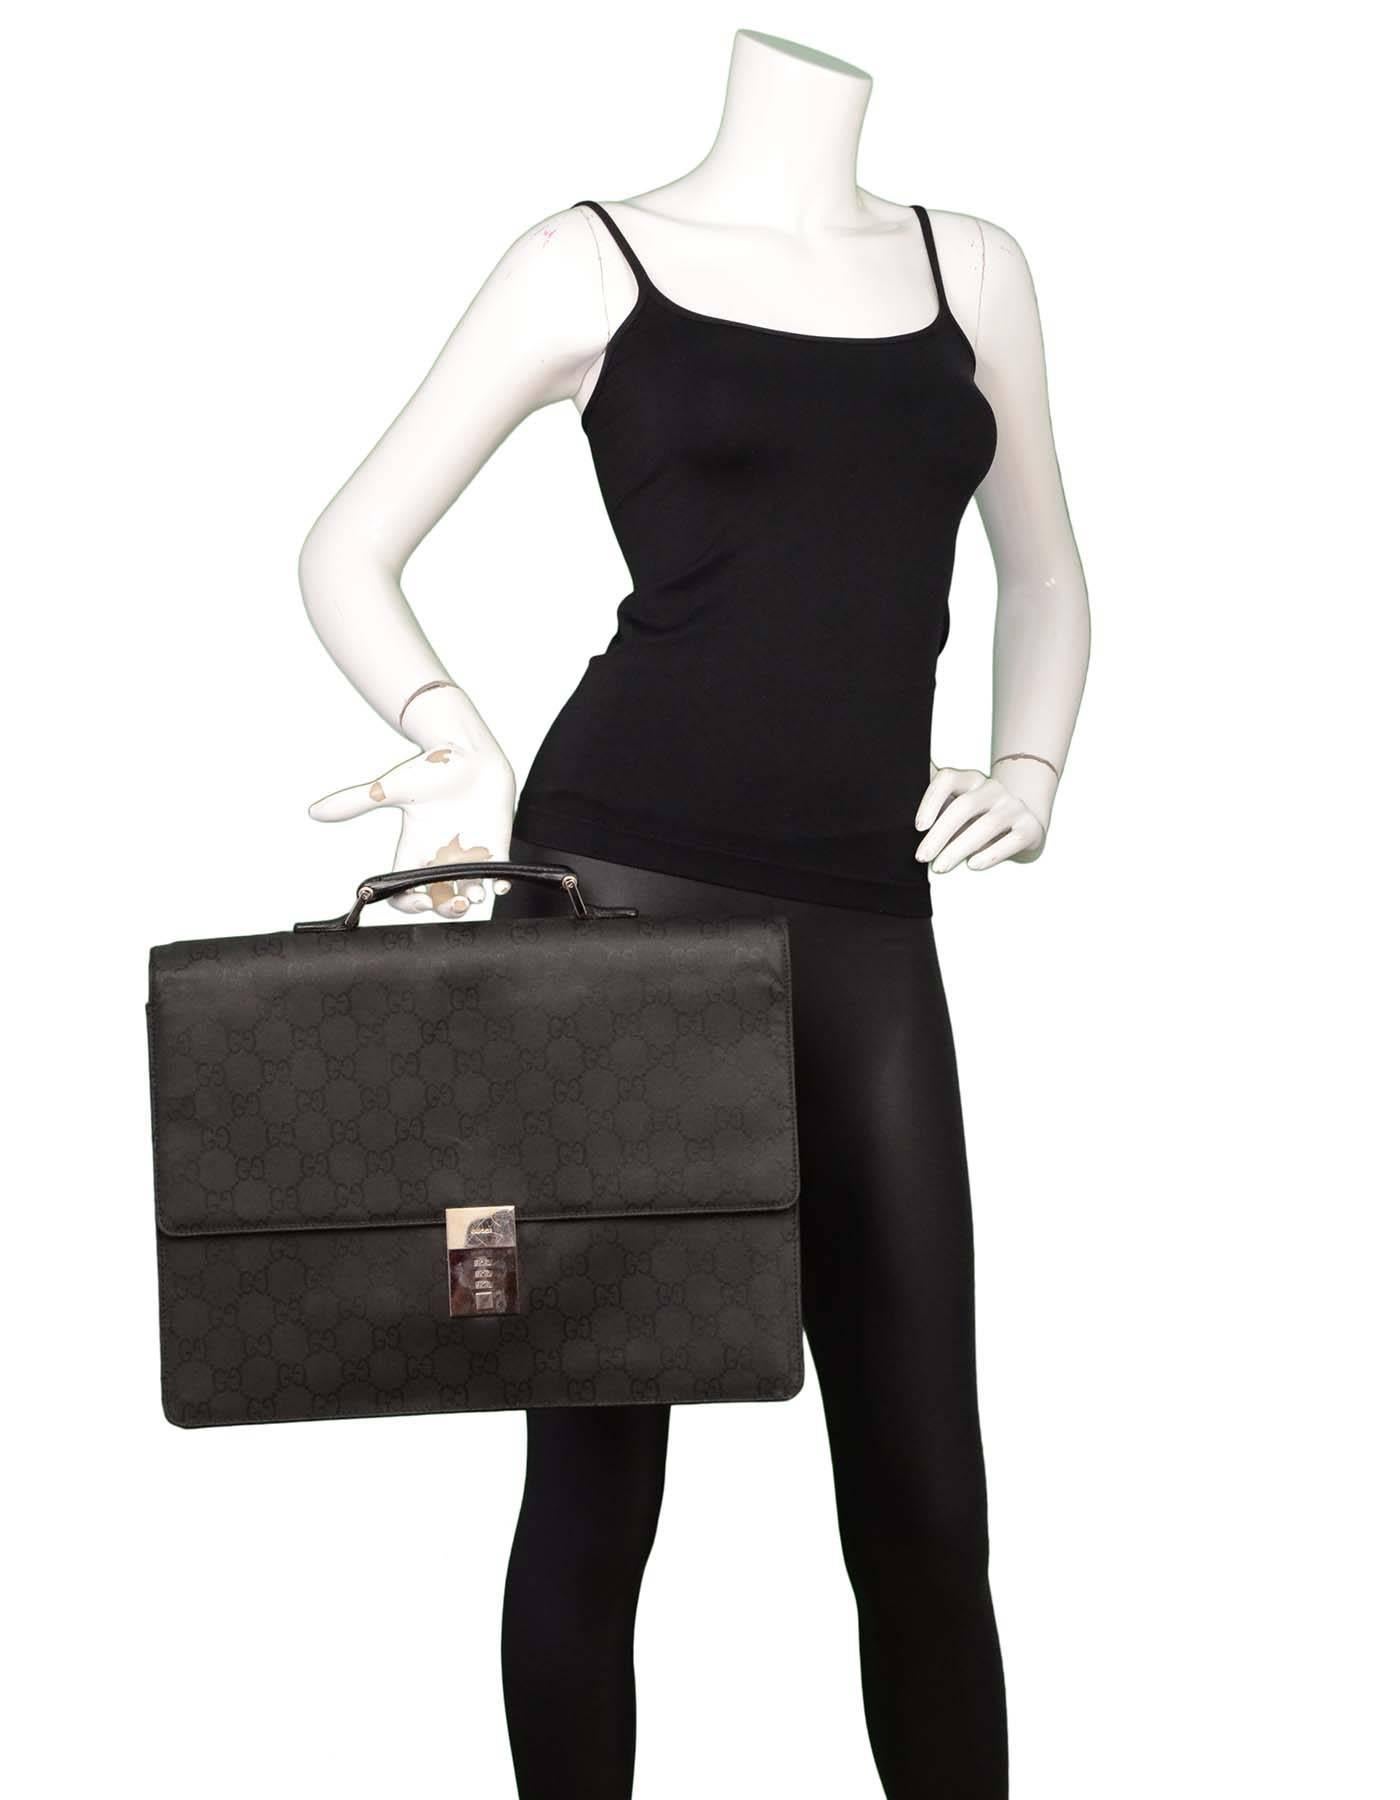 Gucci Black Monogram Canvas Attache
Features optional lock at front

Made In: Italy
Color: Black
Hardware: Silvertone
Materials: Canvas and leather
Lining: Black textile
Closure/Opening: Flap top with push-lock closure
Exterior Pockets: One